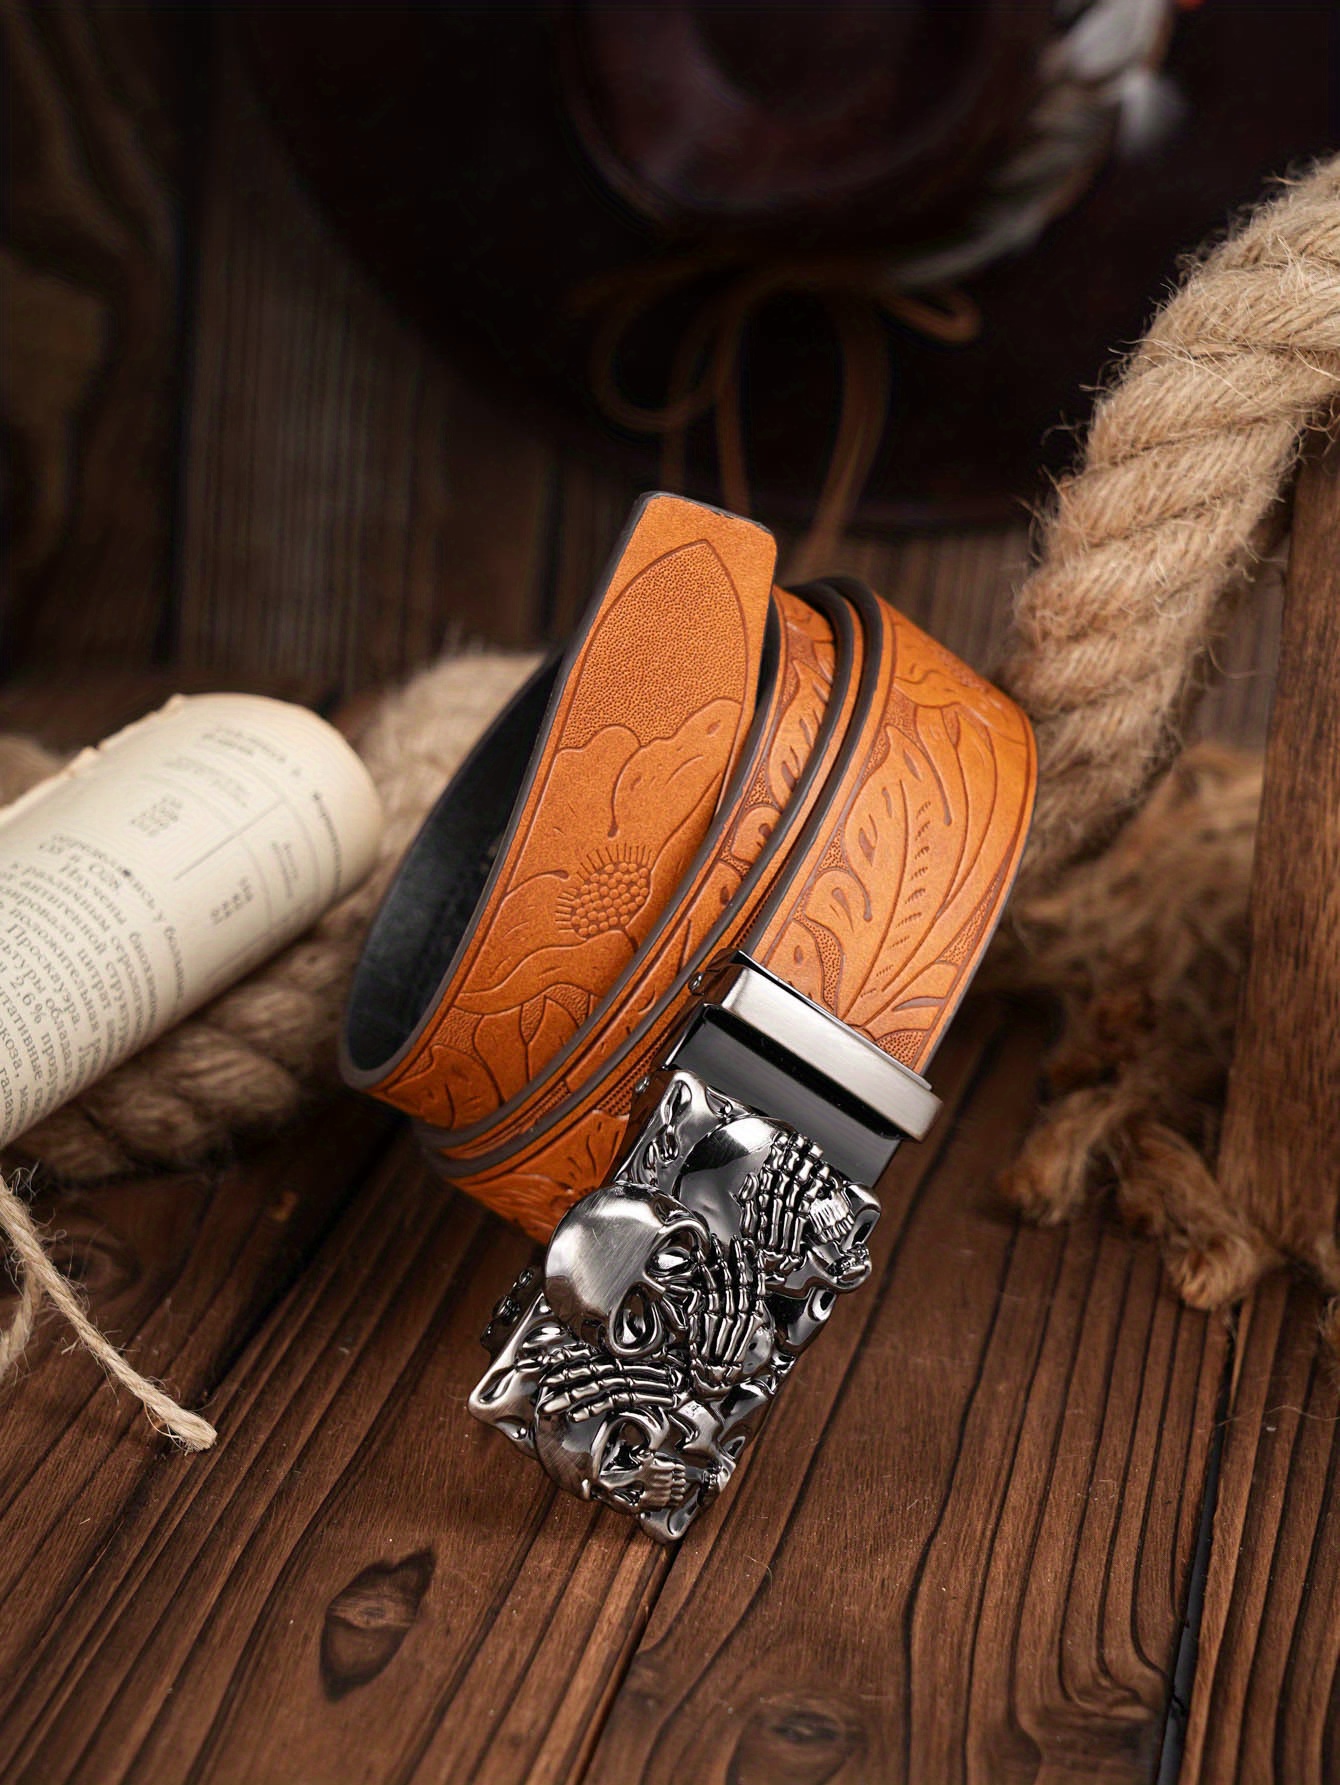 High Quality Orange Genuine Leather Mens Belts Automatic Buckles